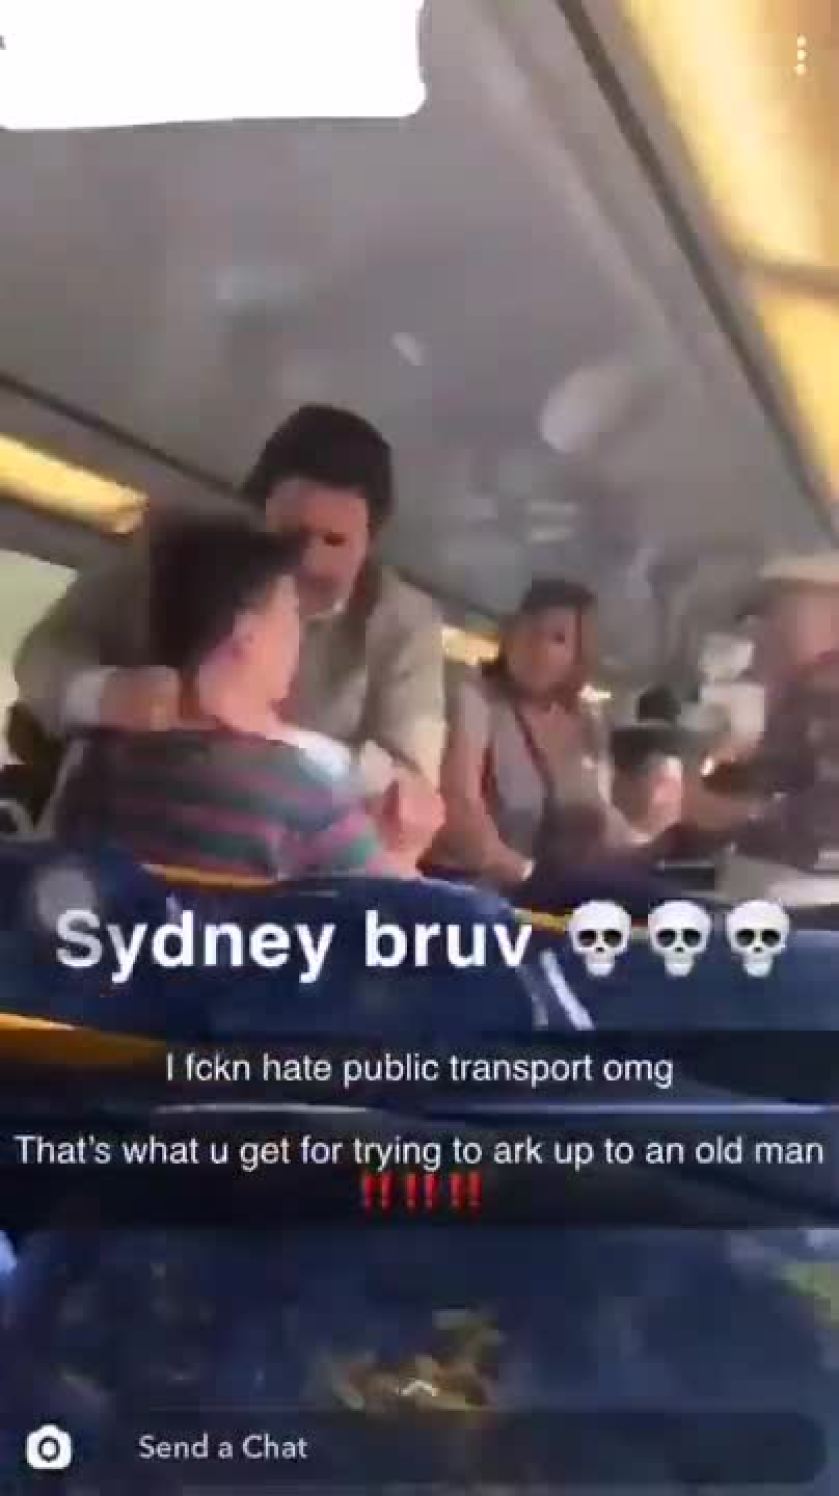 teenager threatens to 'crack' old man on sydney train, gets dealt with by other passengers